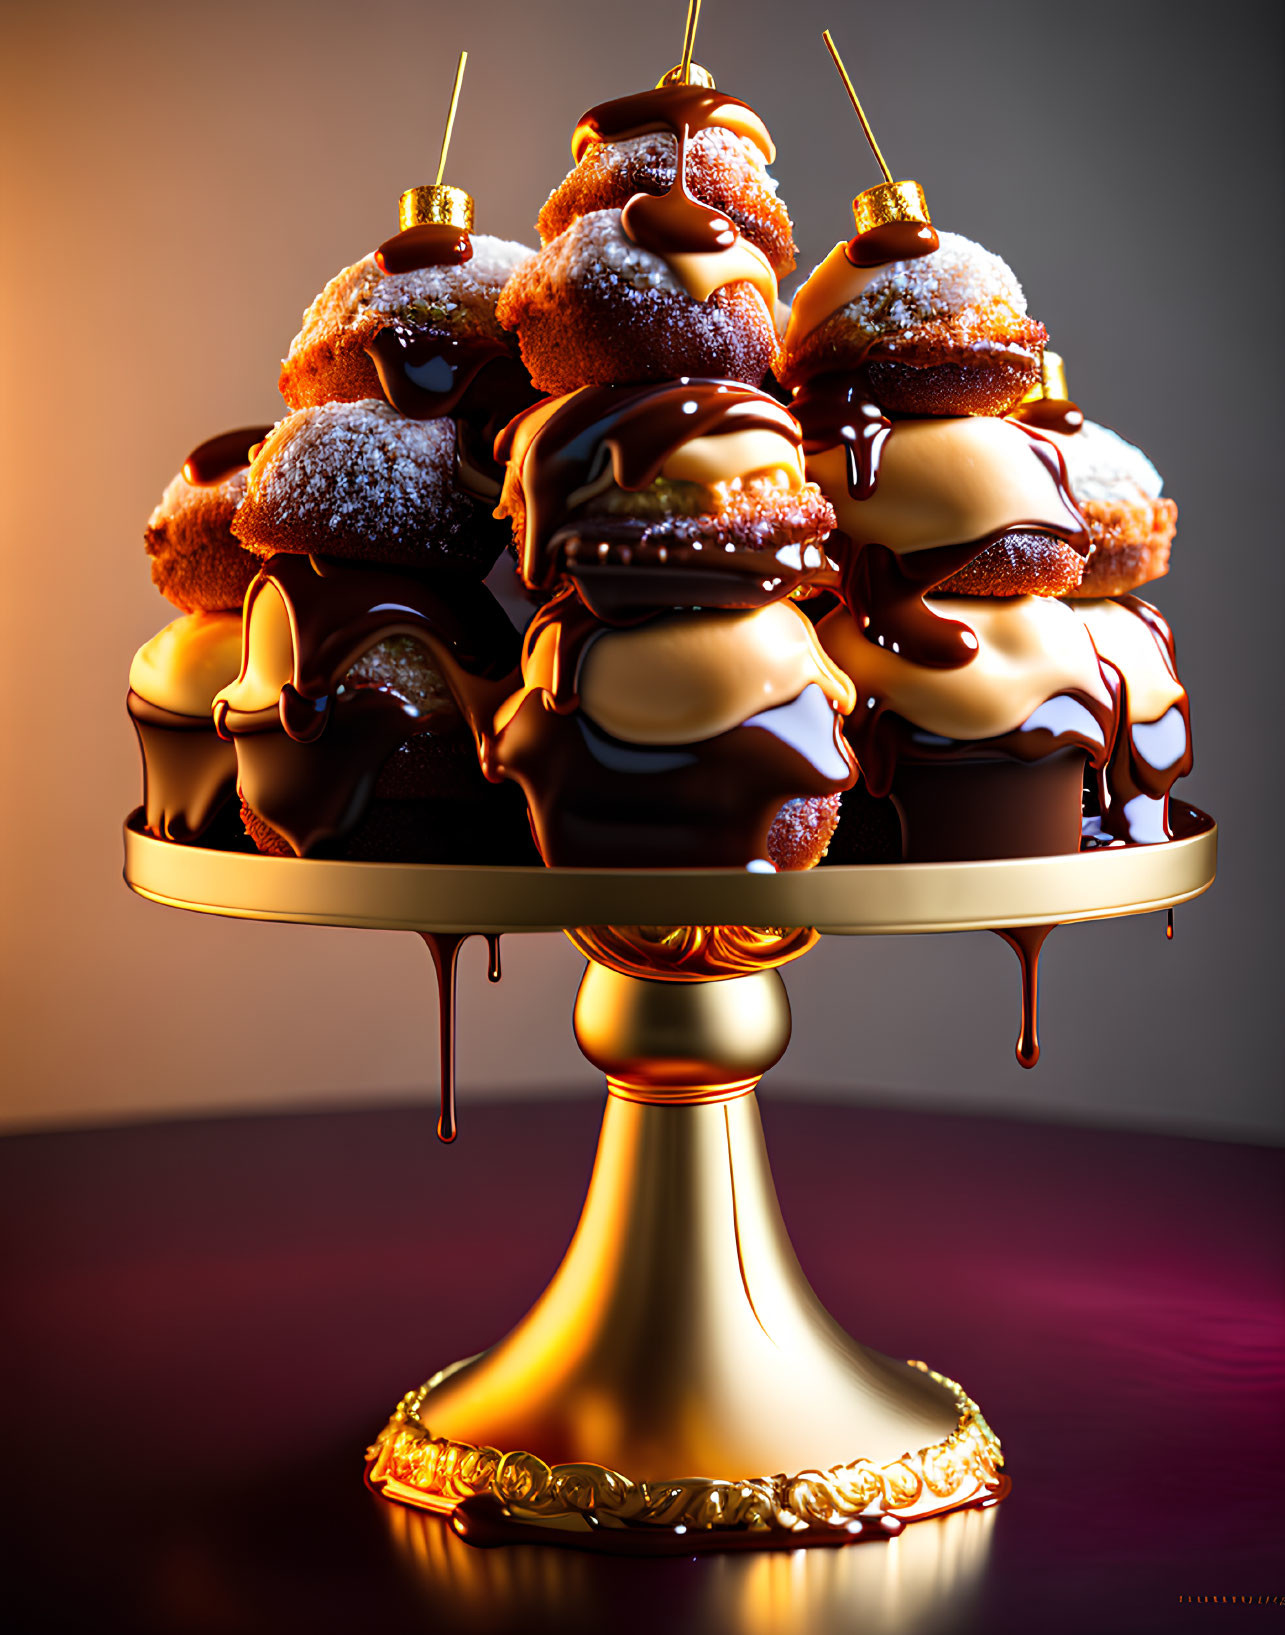 Decadent chocolate-drizzled donuts on tiered stand with sugar dusting